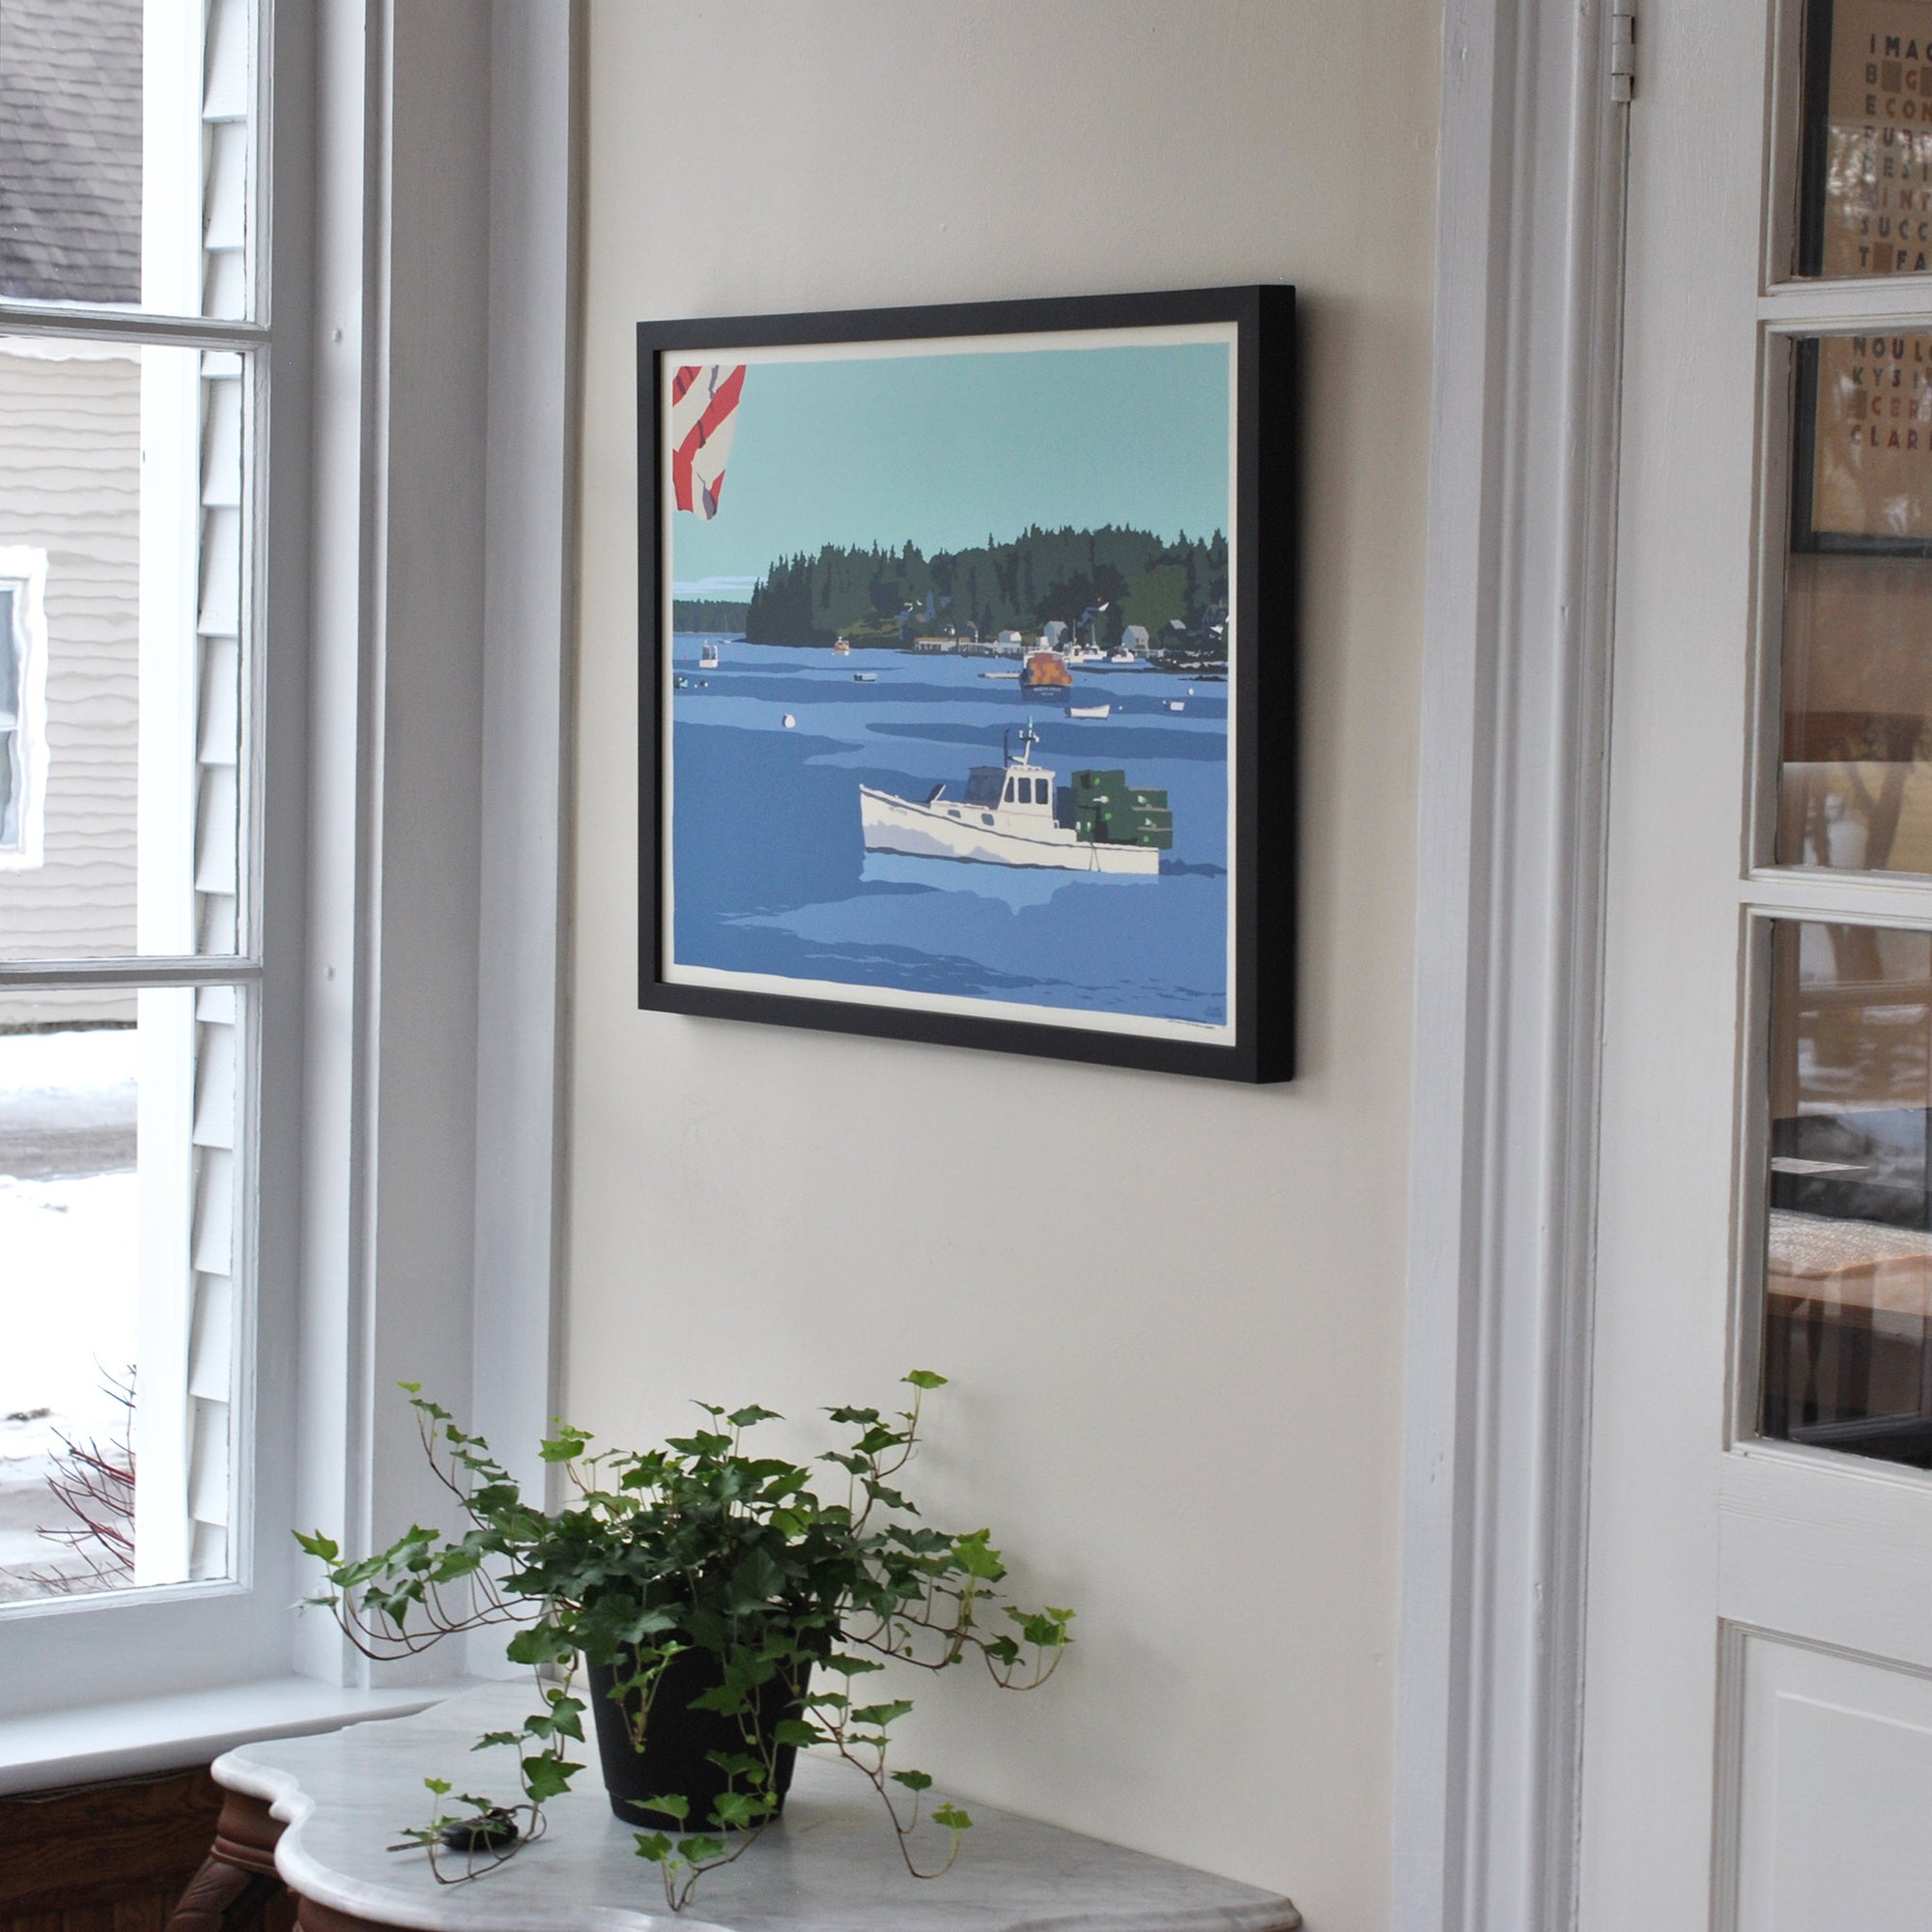 Port Clyde Lobster Boat Art Print 18" x 24" Horizontal Framed Wall Poster By Alan Claude - Maine